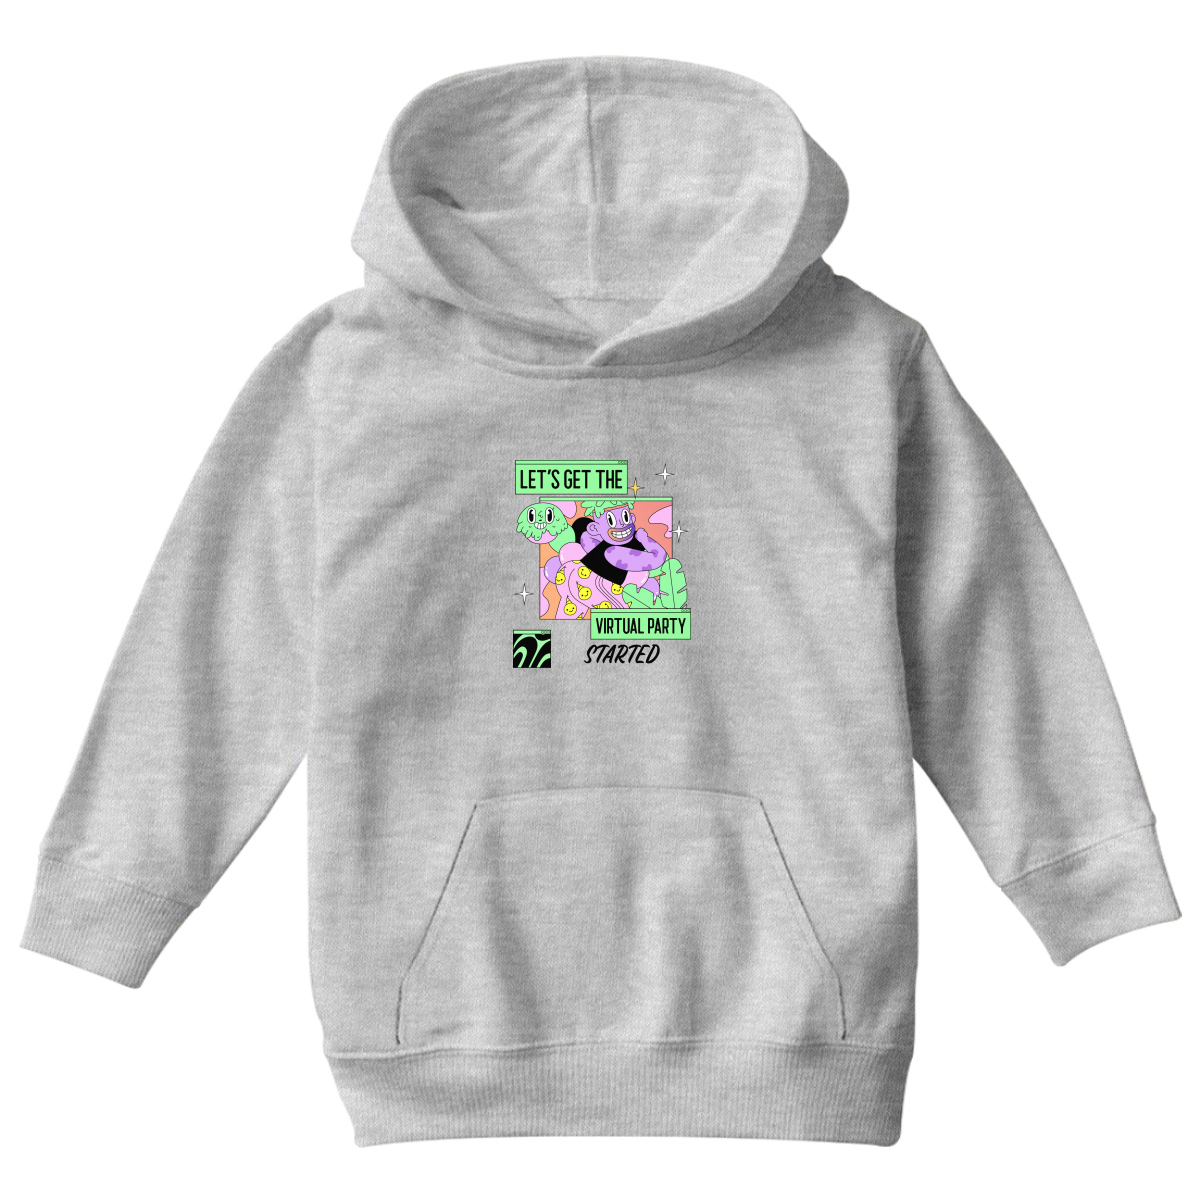 Let's get the virtual party started Kids Hoodie | Gray